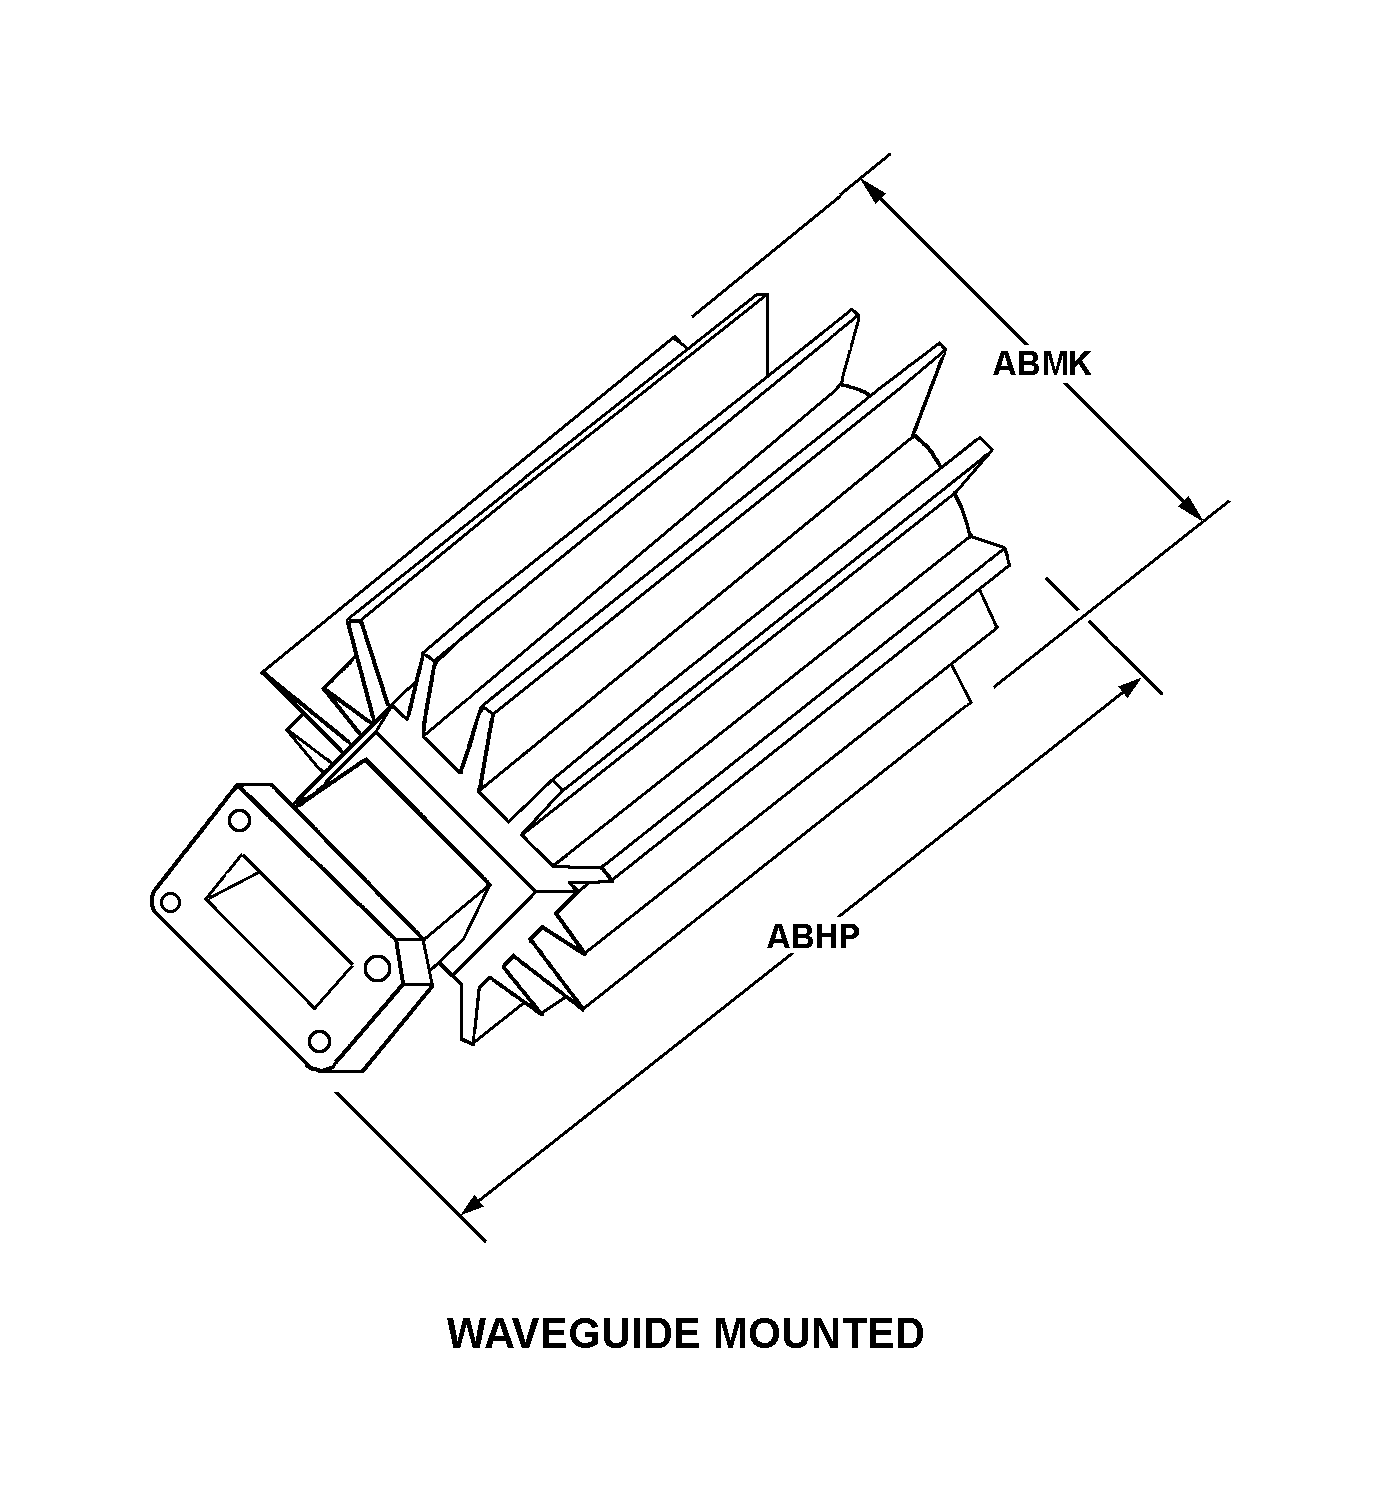 WAVEGUIDE MOUNTED style nsn 5985-01-242-3313